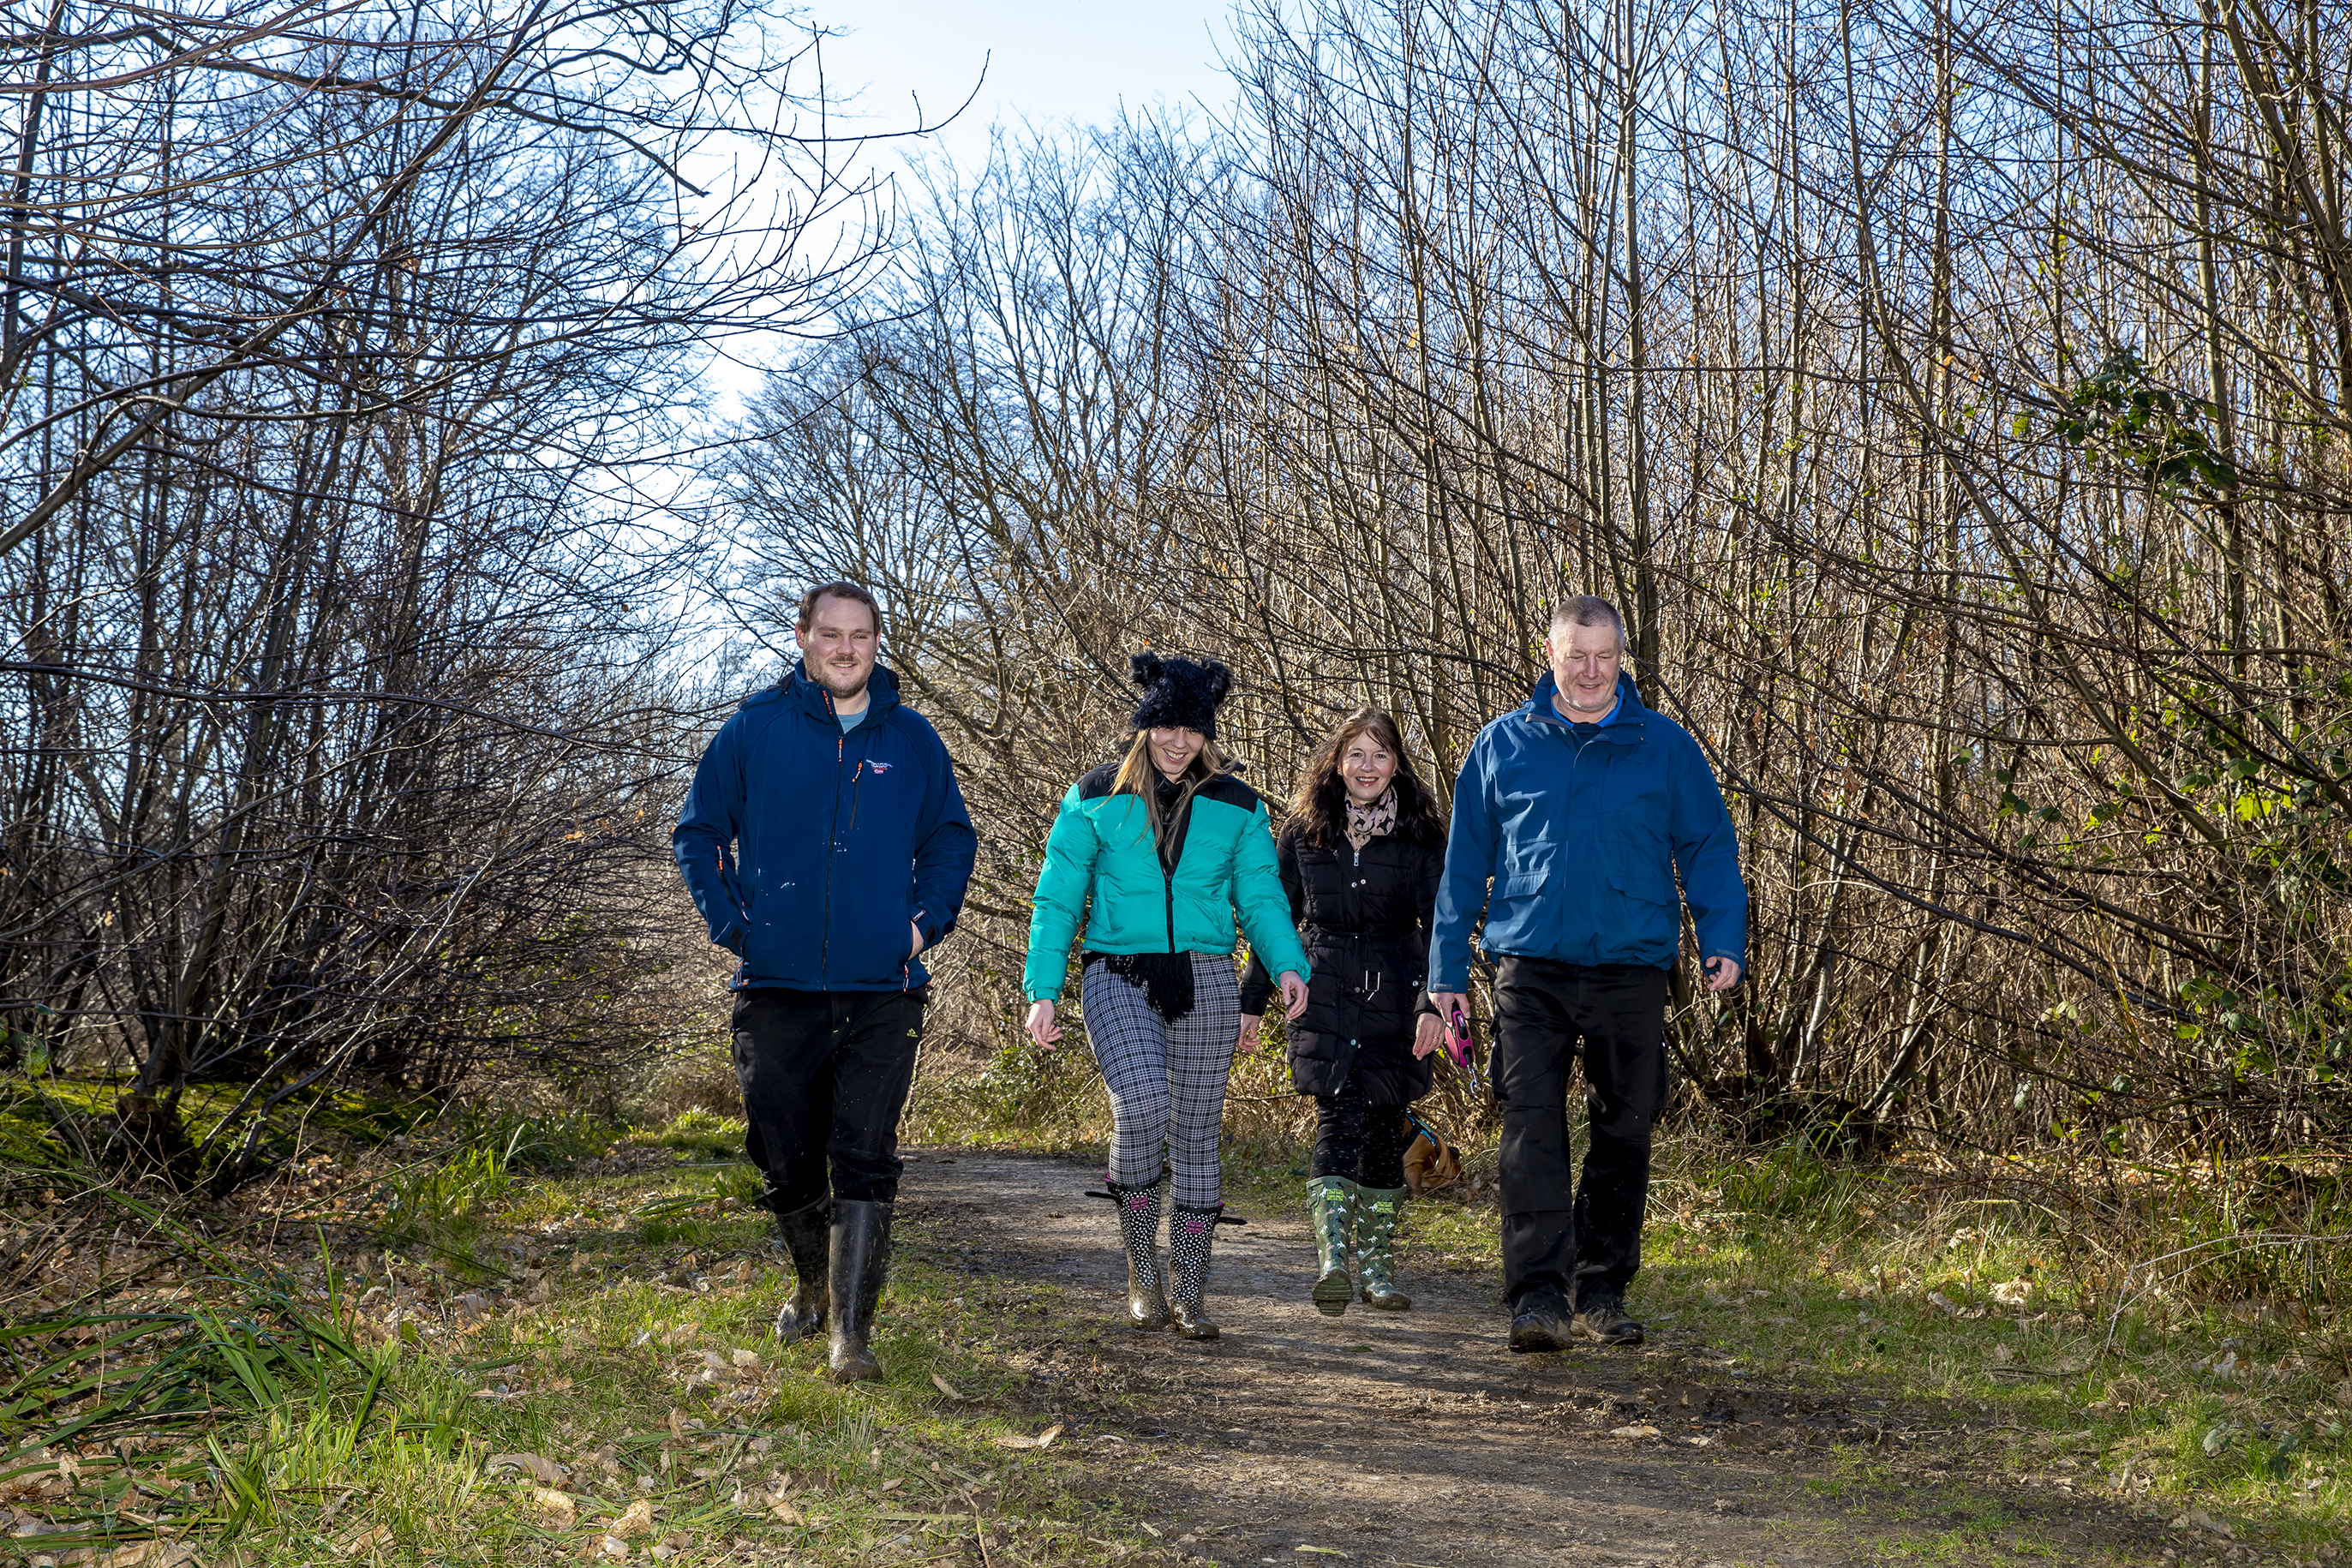 The image shows 4 adults walking in the woods.